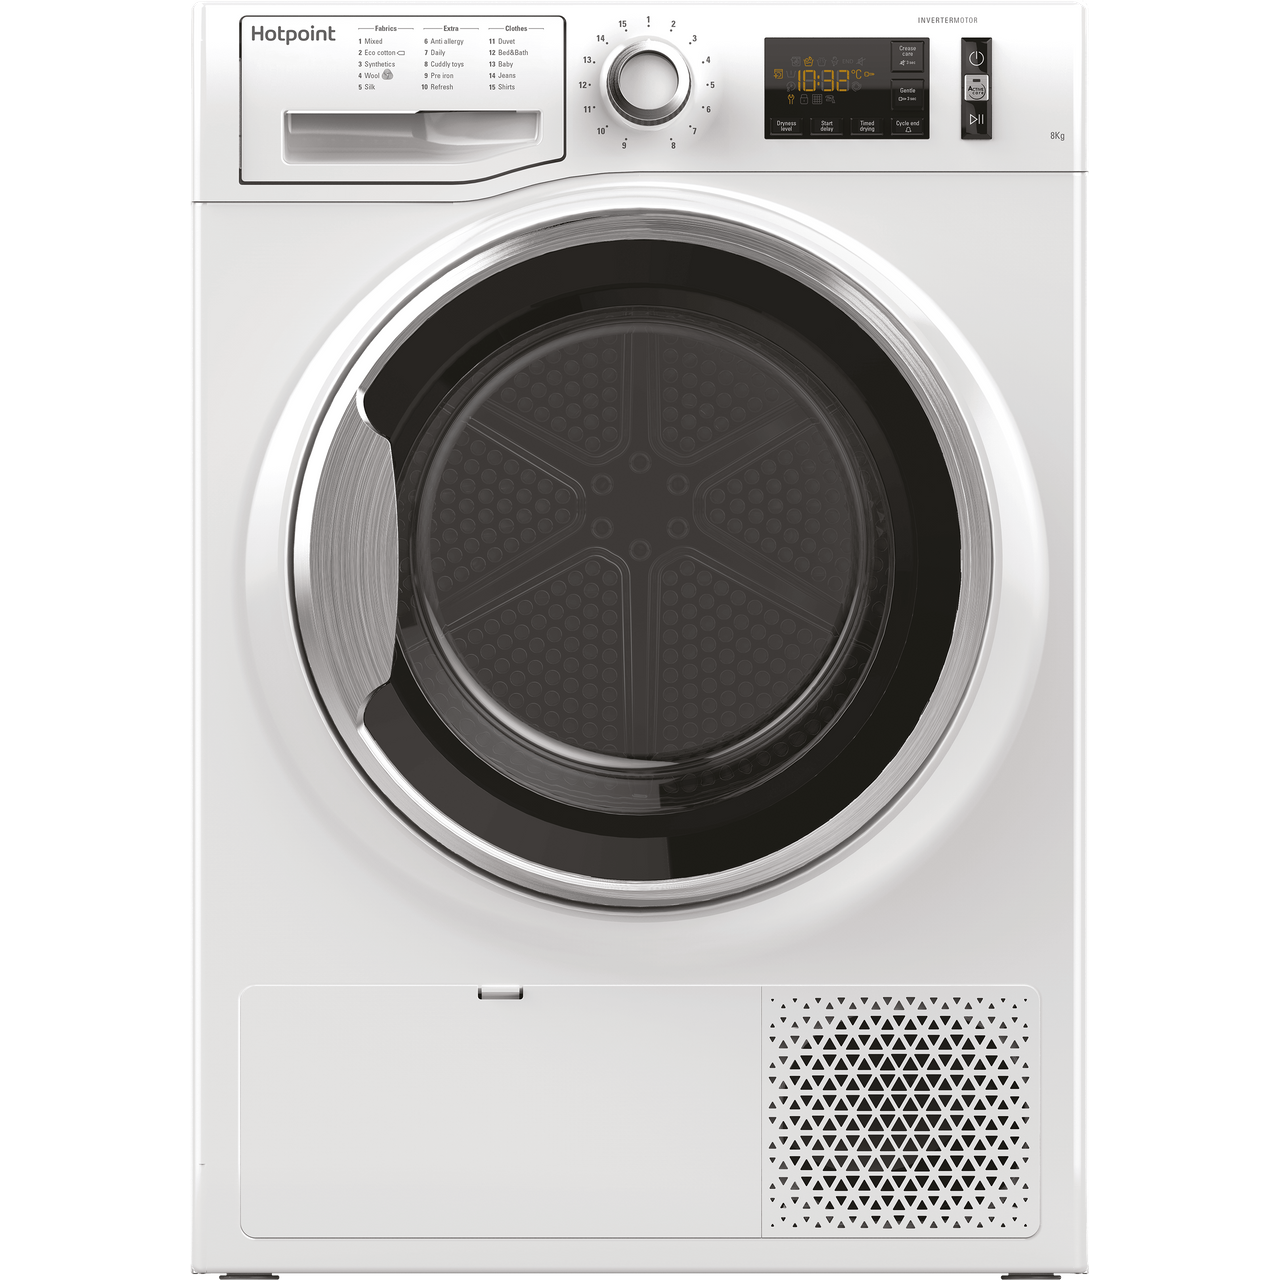 Hotpoint ActiveCare NTM1182XBUK 8Kg Heat Pump Tumble Dryer - White - A++ Rated